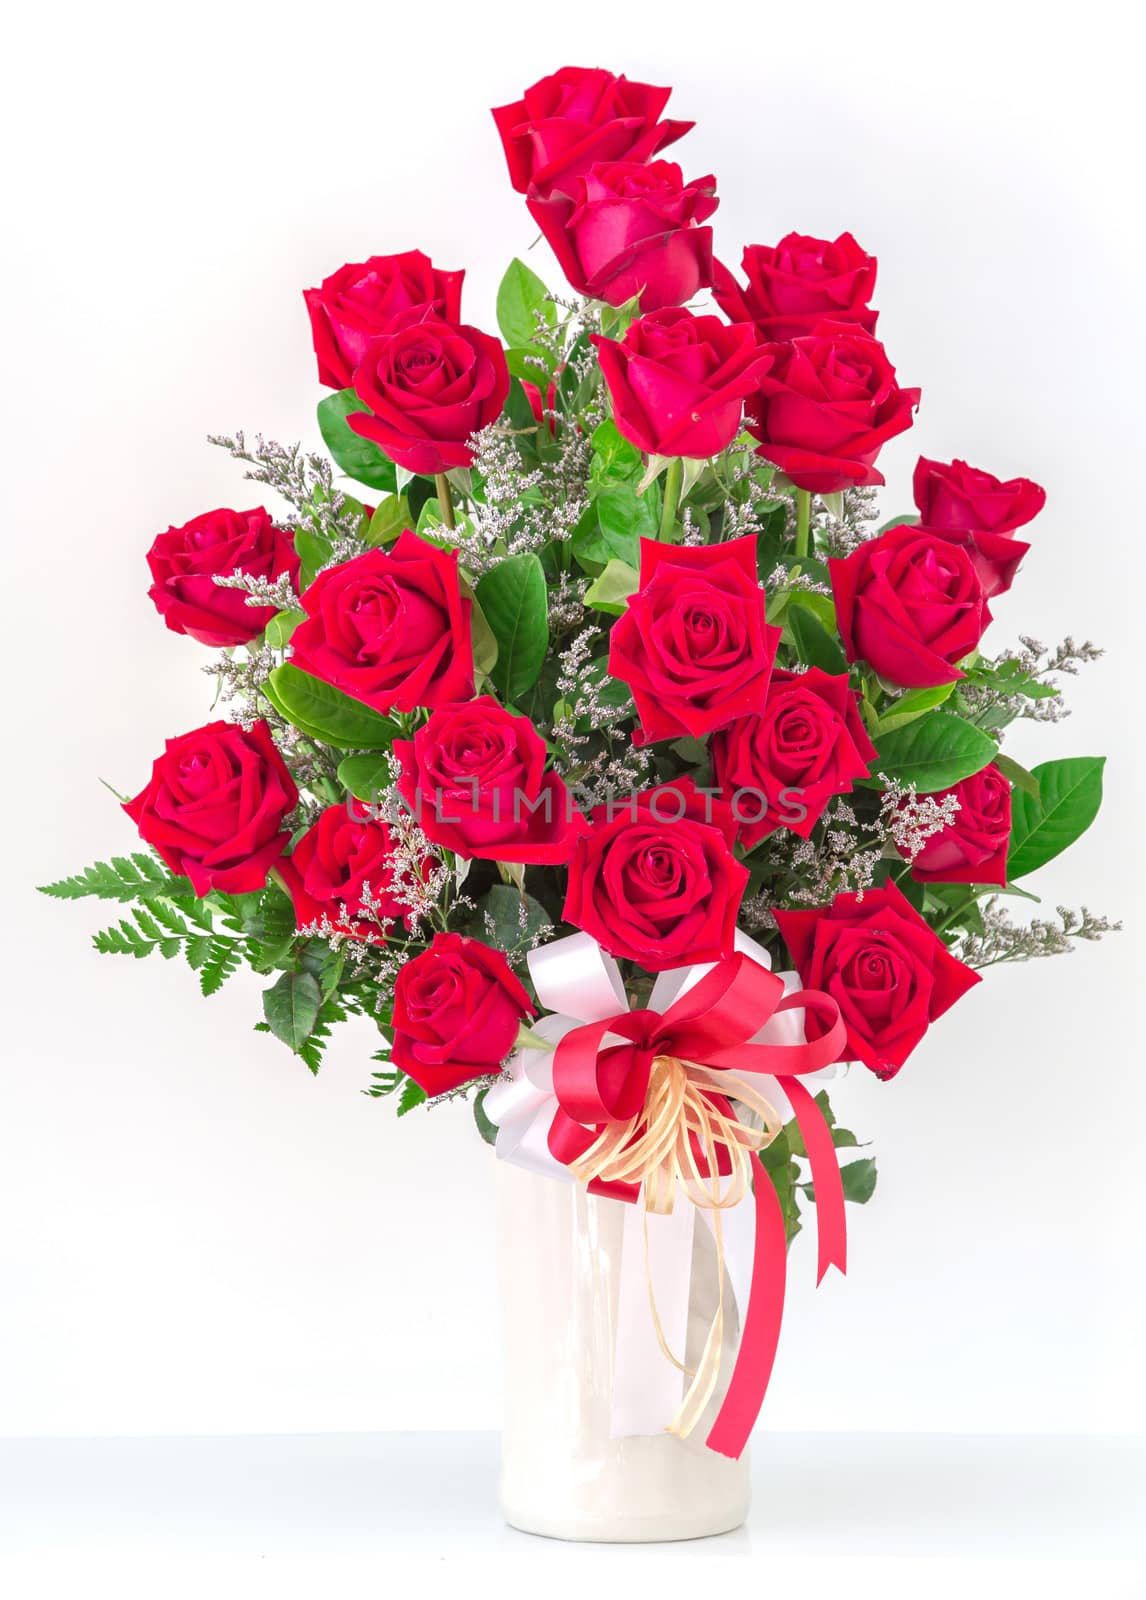 Bouquet of red roses by smuay